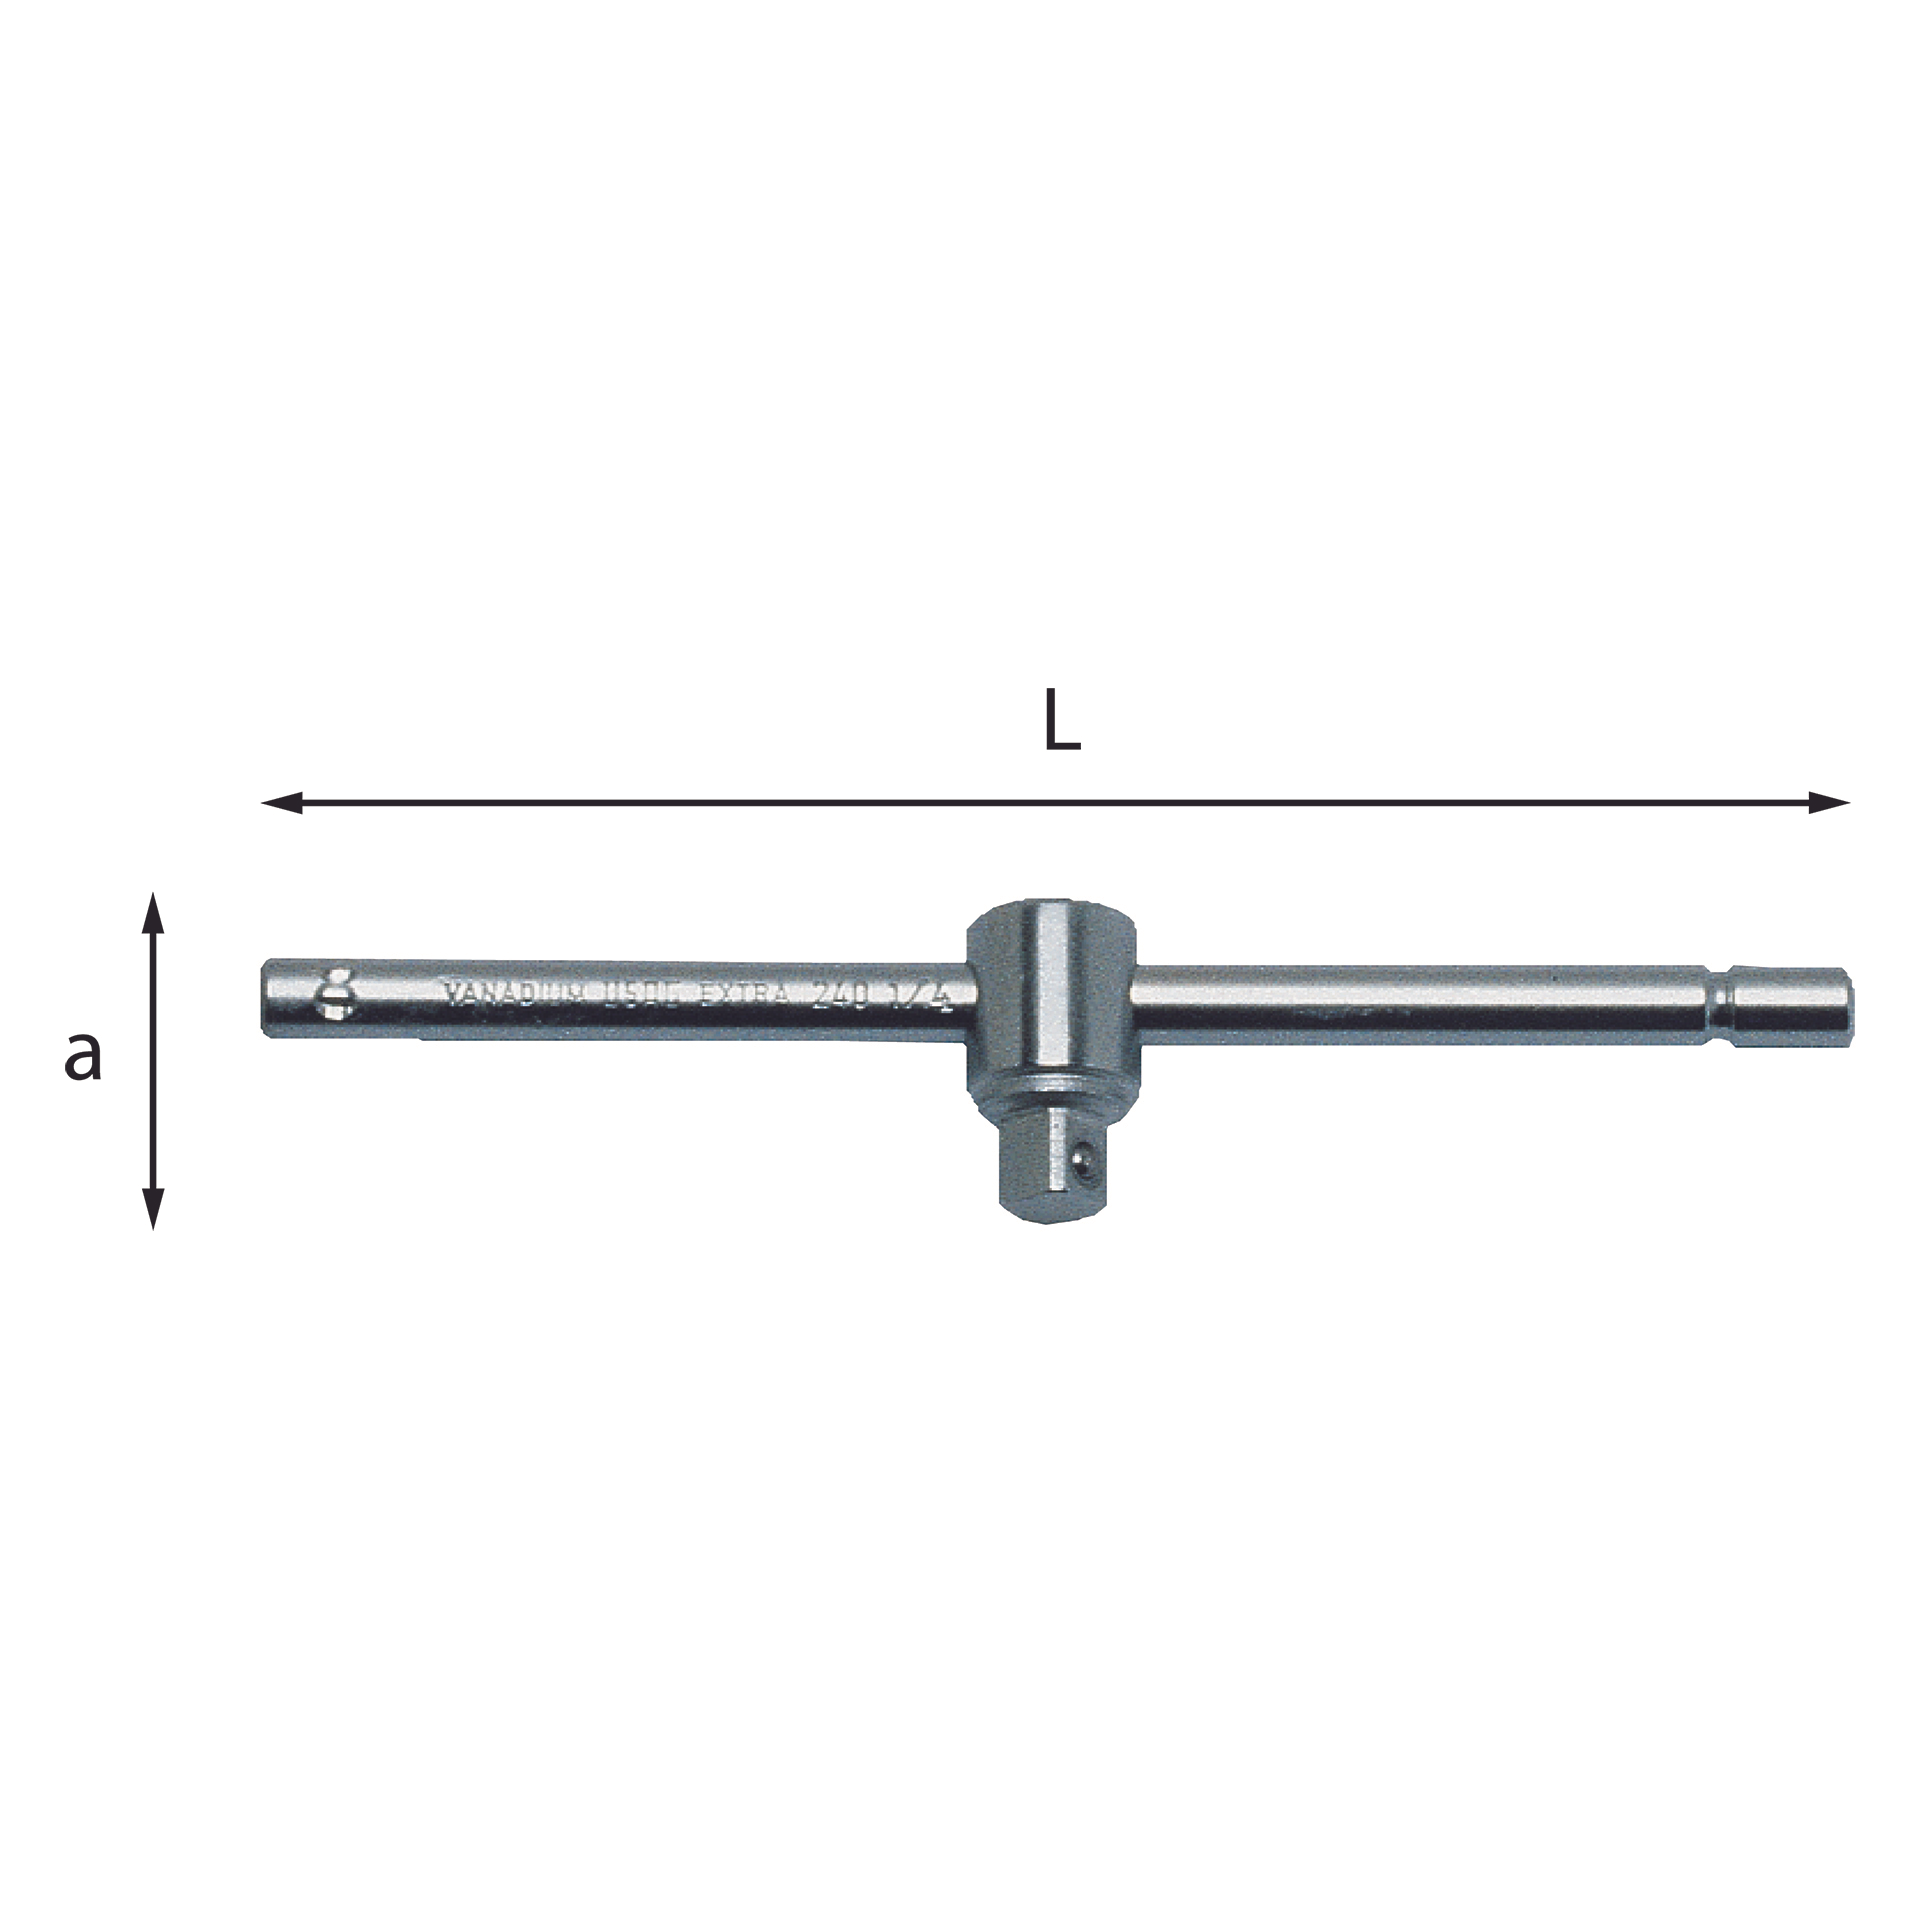 L. 425mm T-handle with slinding square drive a 62mm - Usag 240 3/4 N